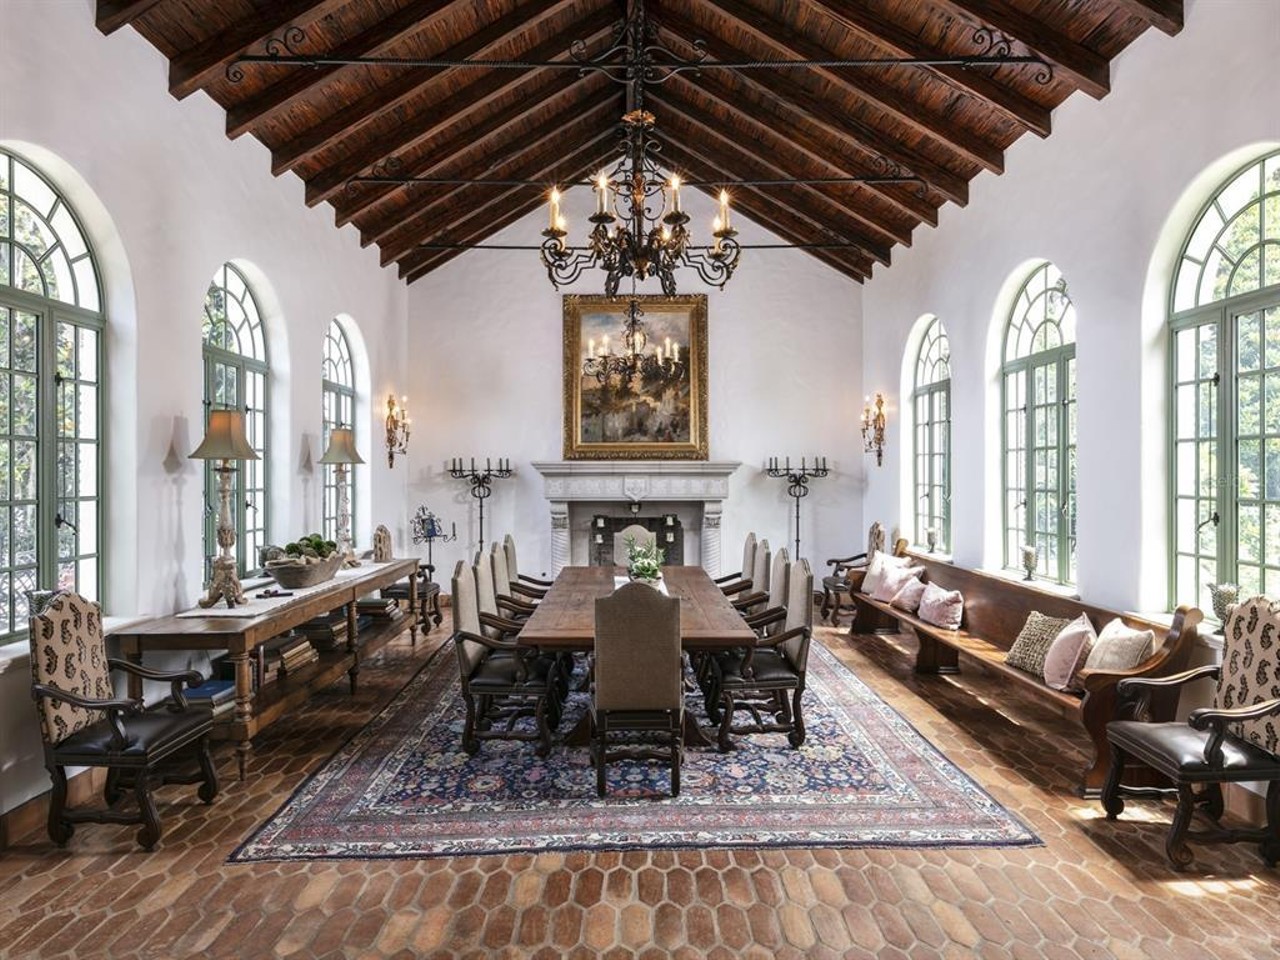 John Morgan's son bought the most expensive mansion in Winter Park